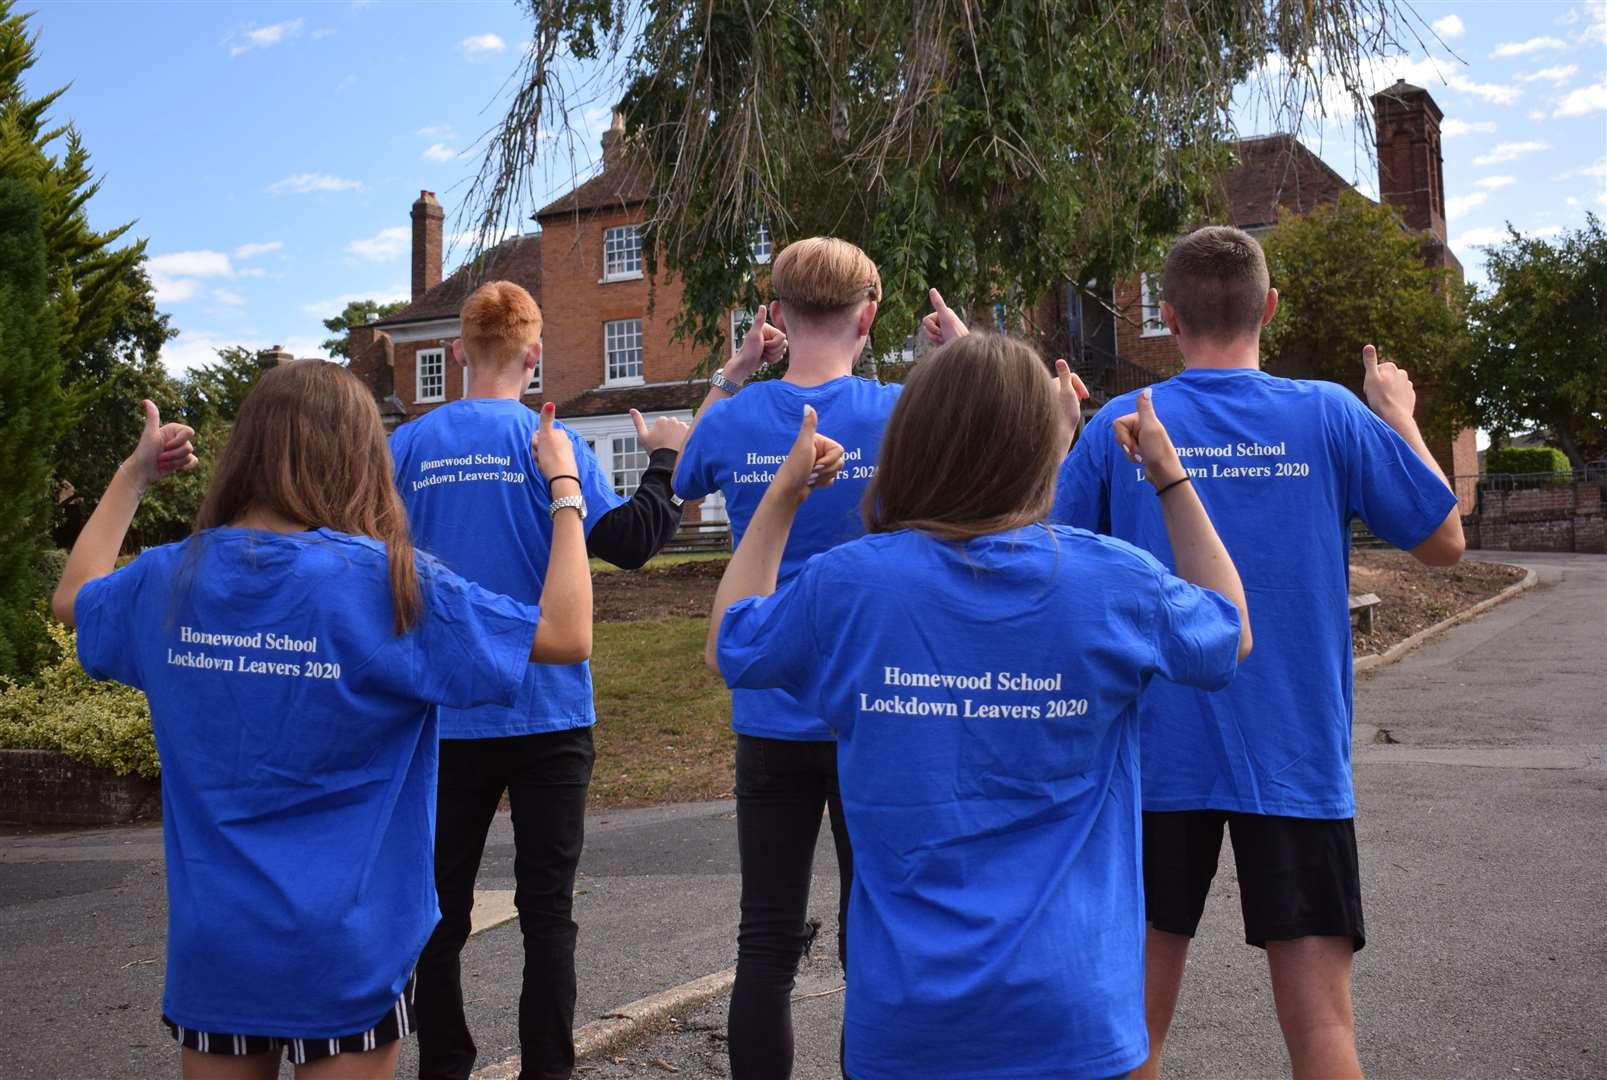 This year's Homewood School leavers were special shirts to mark their unique year in education